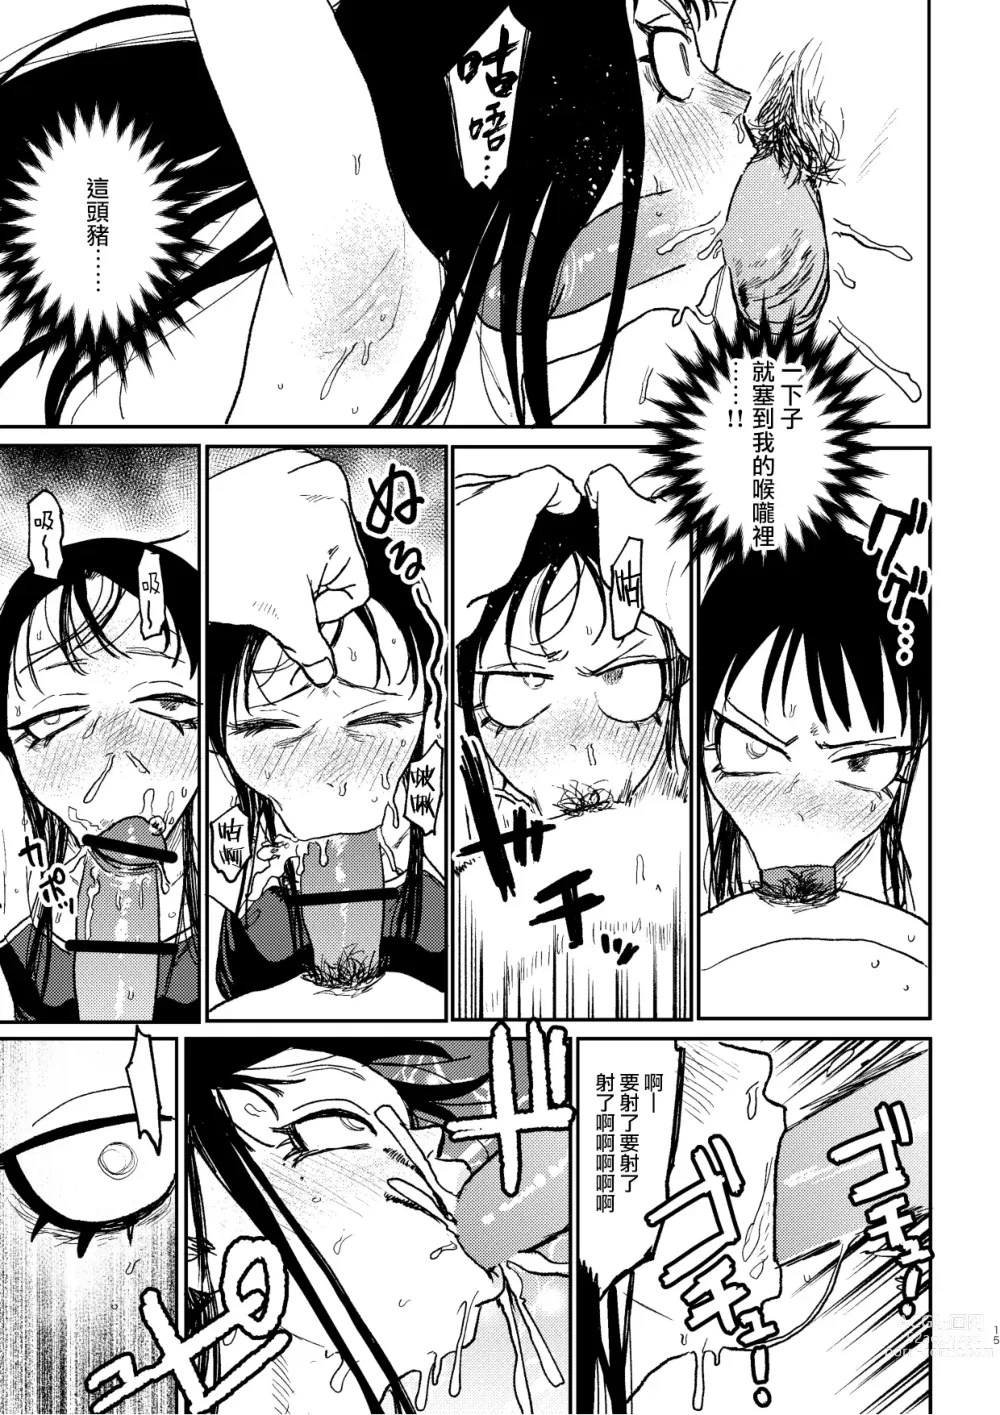 Page 14 of doujinshi better than SEX:A